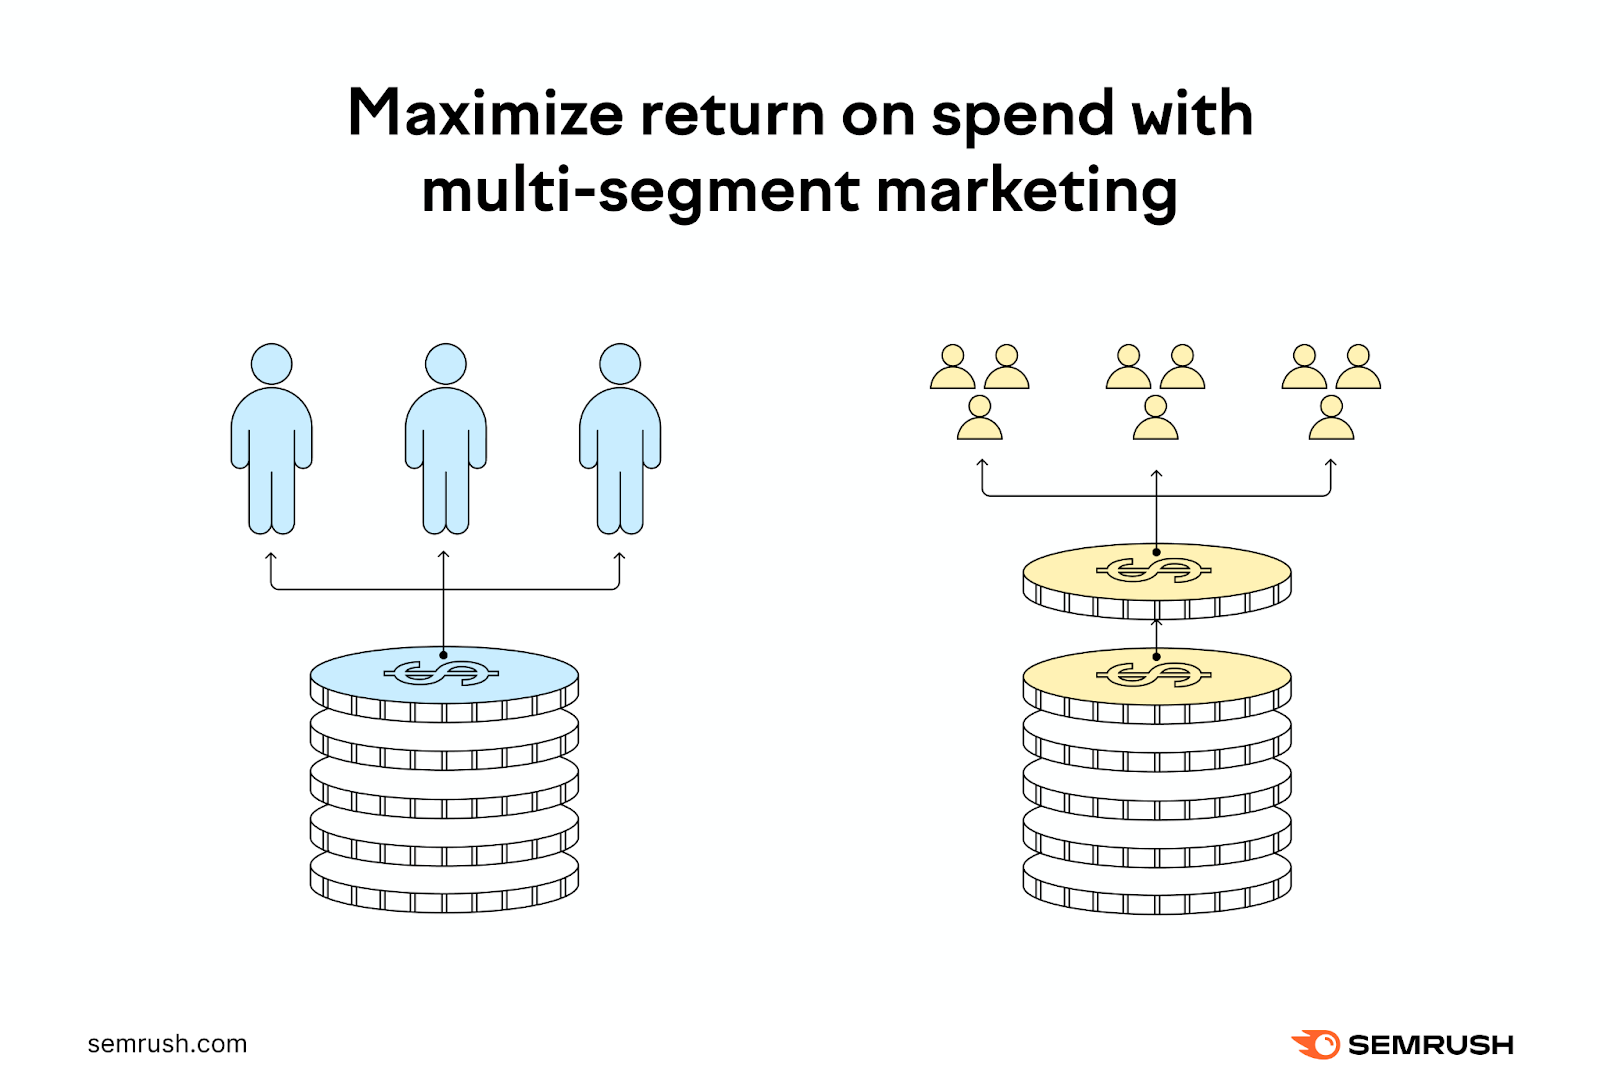 Marketing segments s،uld get more spend as they provide more return on investment.